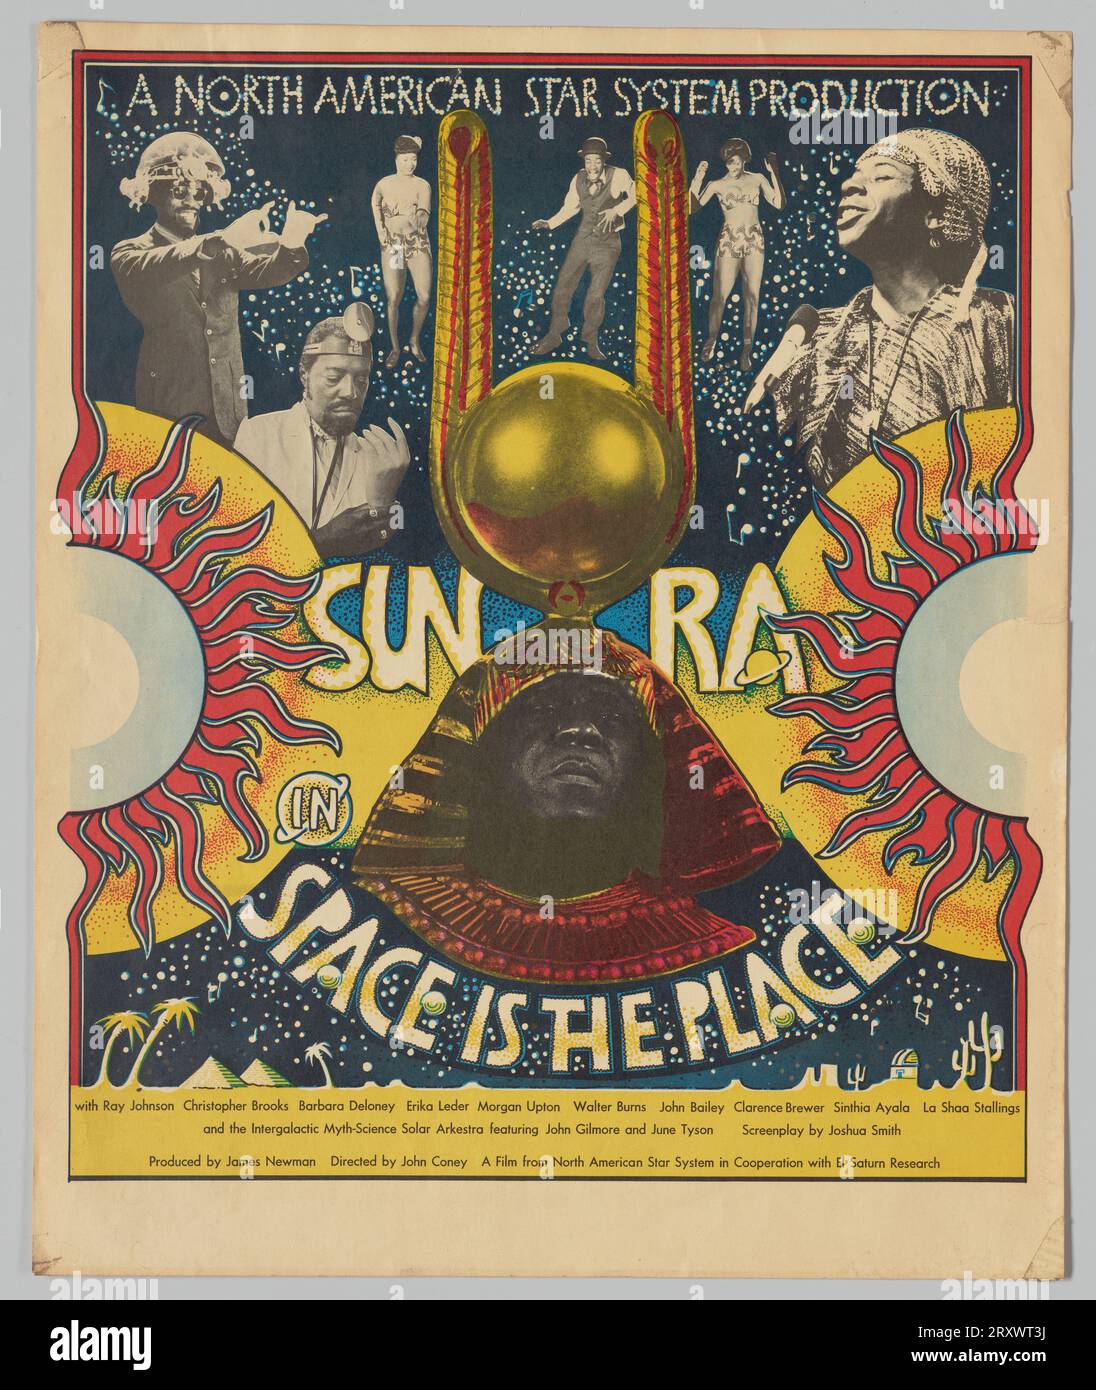 Poster for the film Space is the Place ca. 1974 Stock Photo